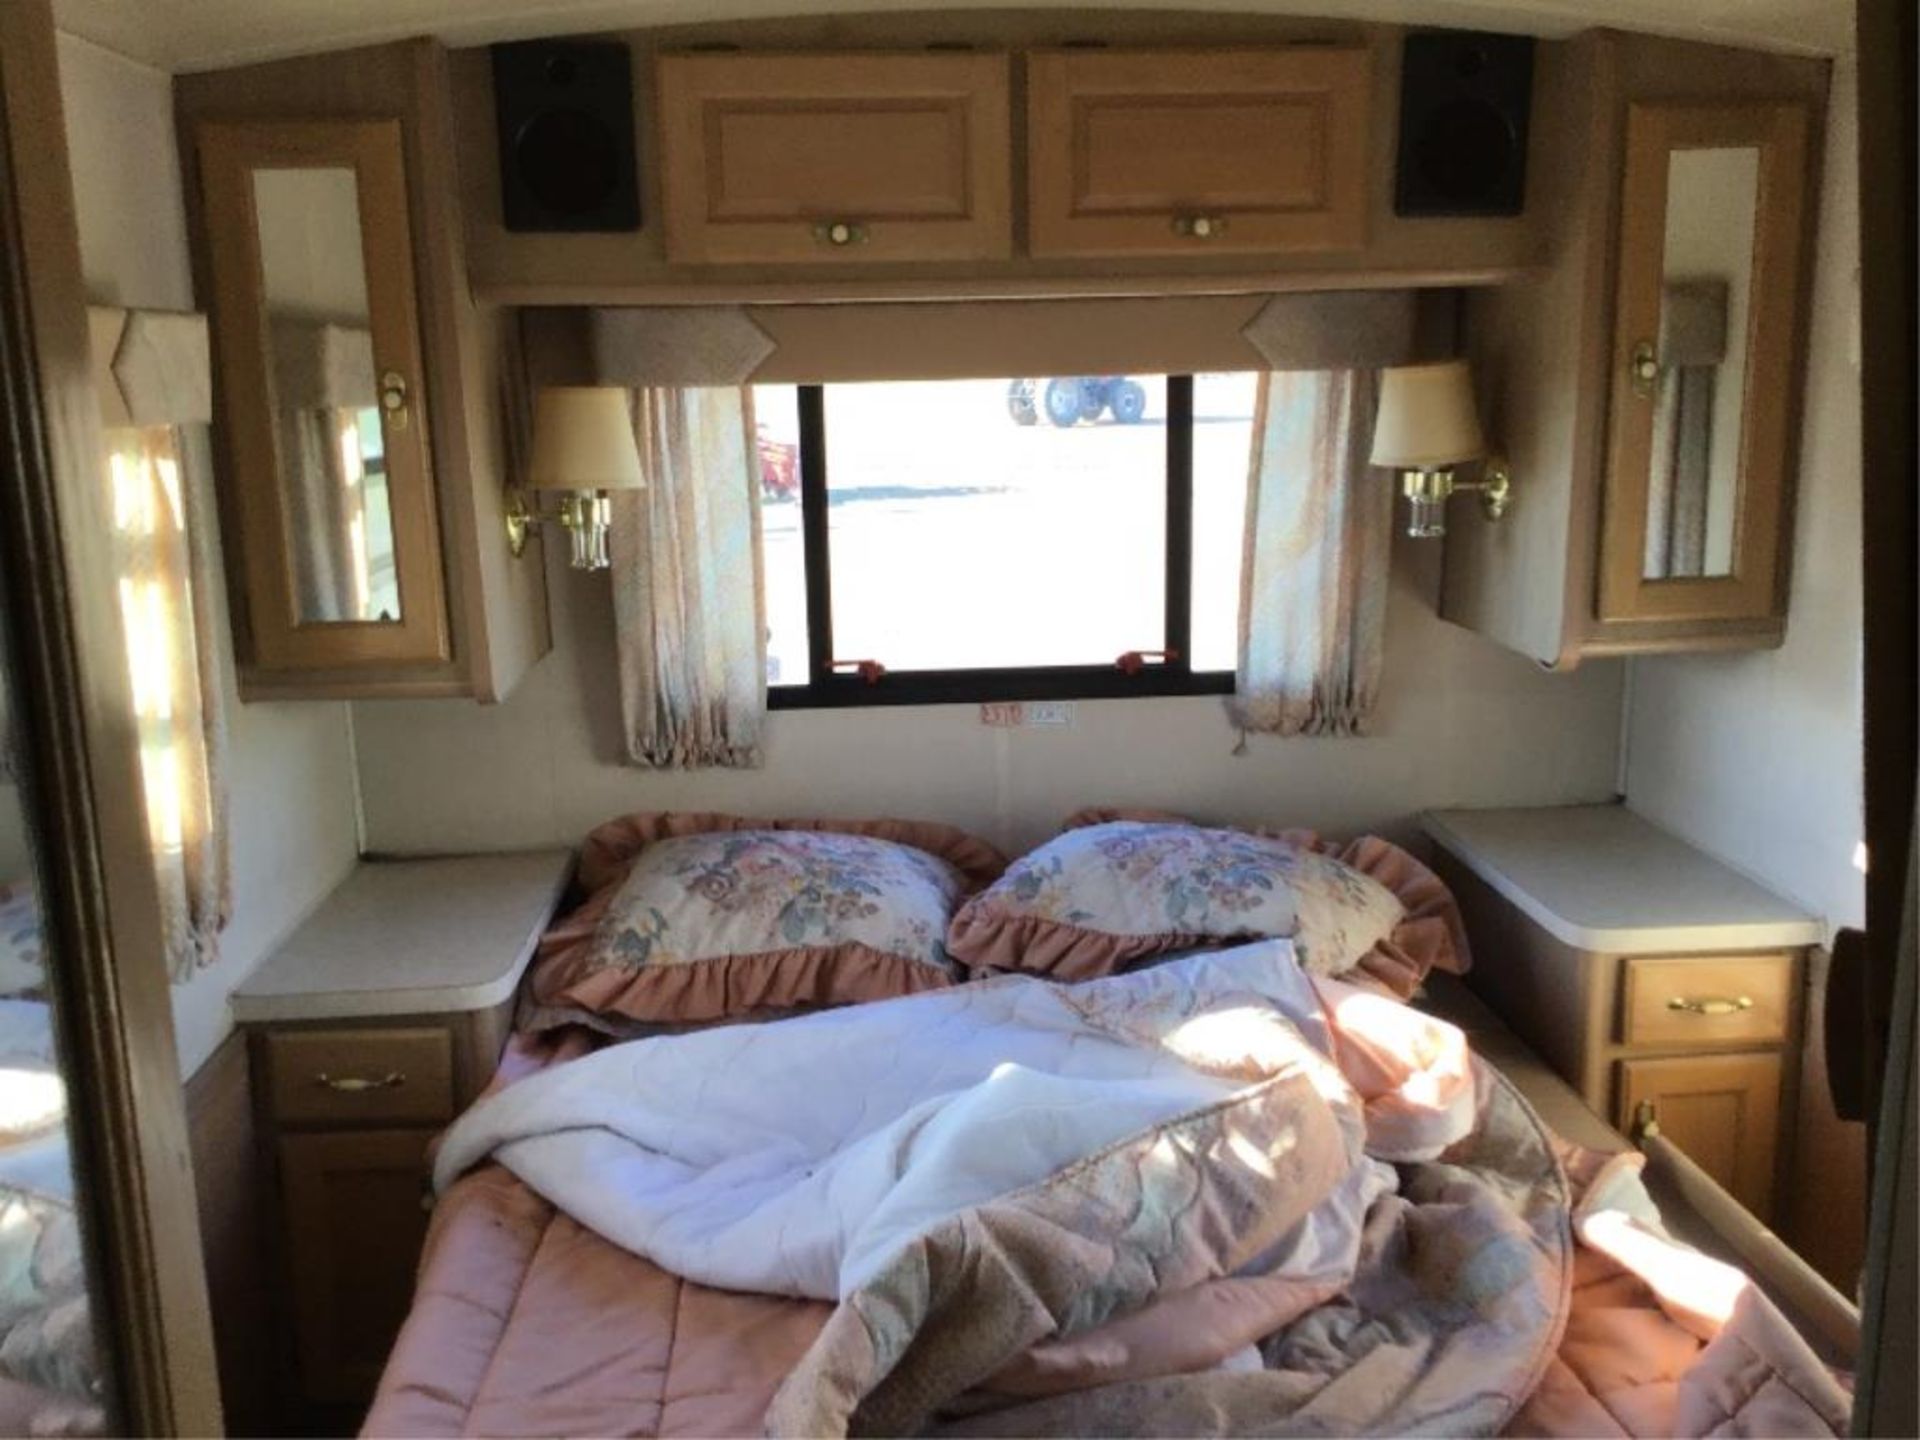 1990 Southwind Chevy 36ft Motorhome - Image 8 of 16